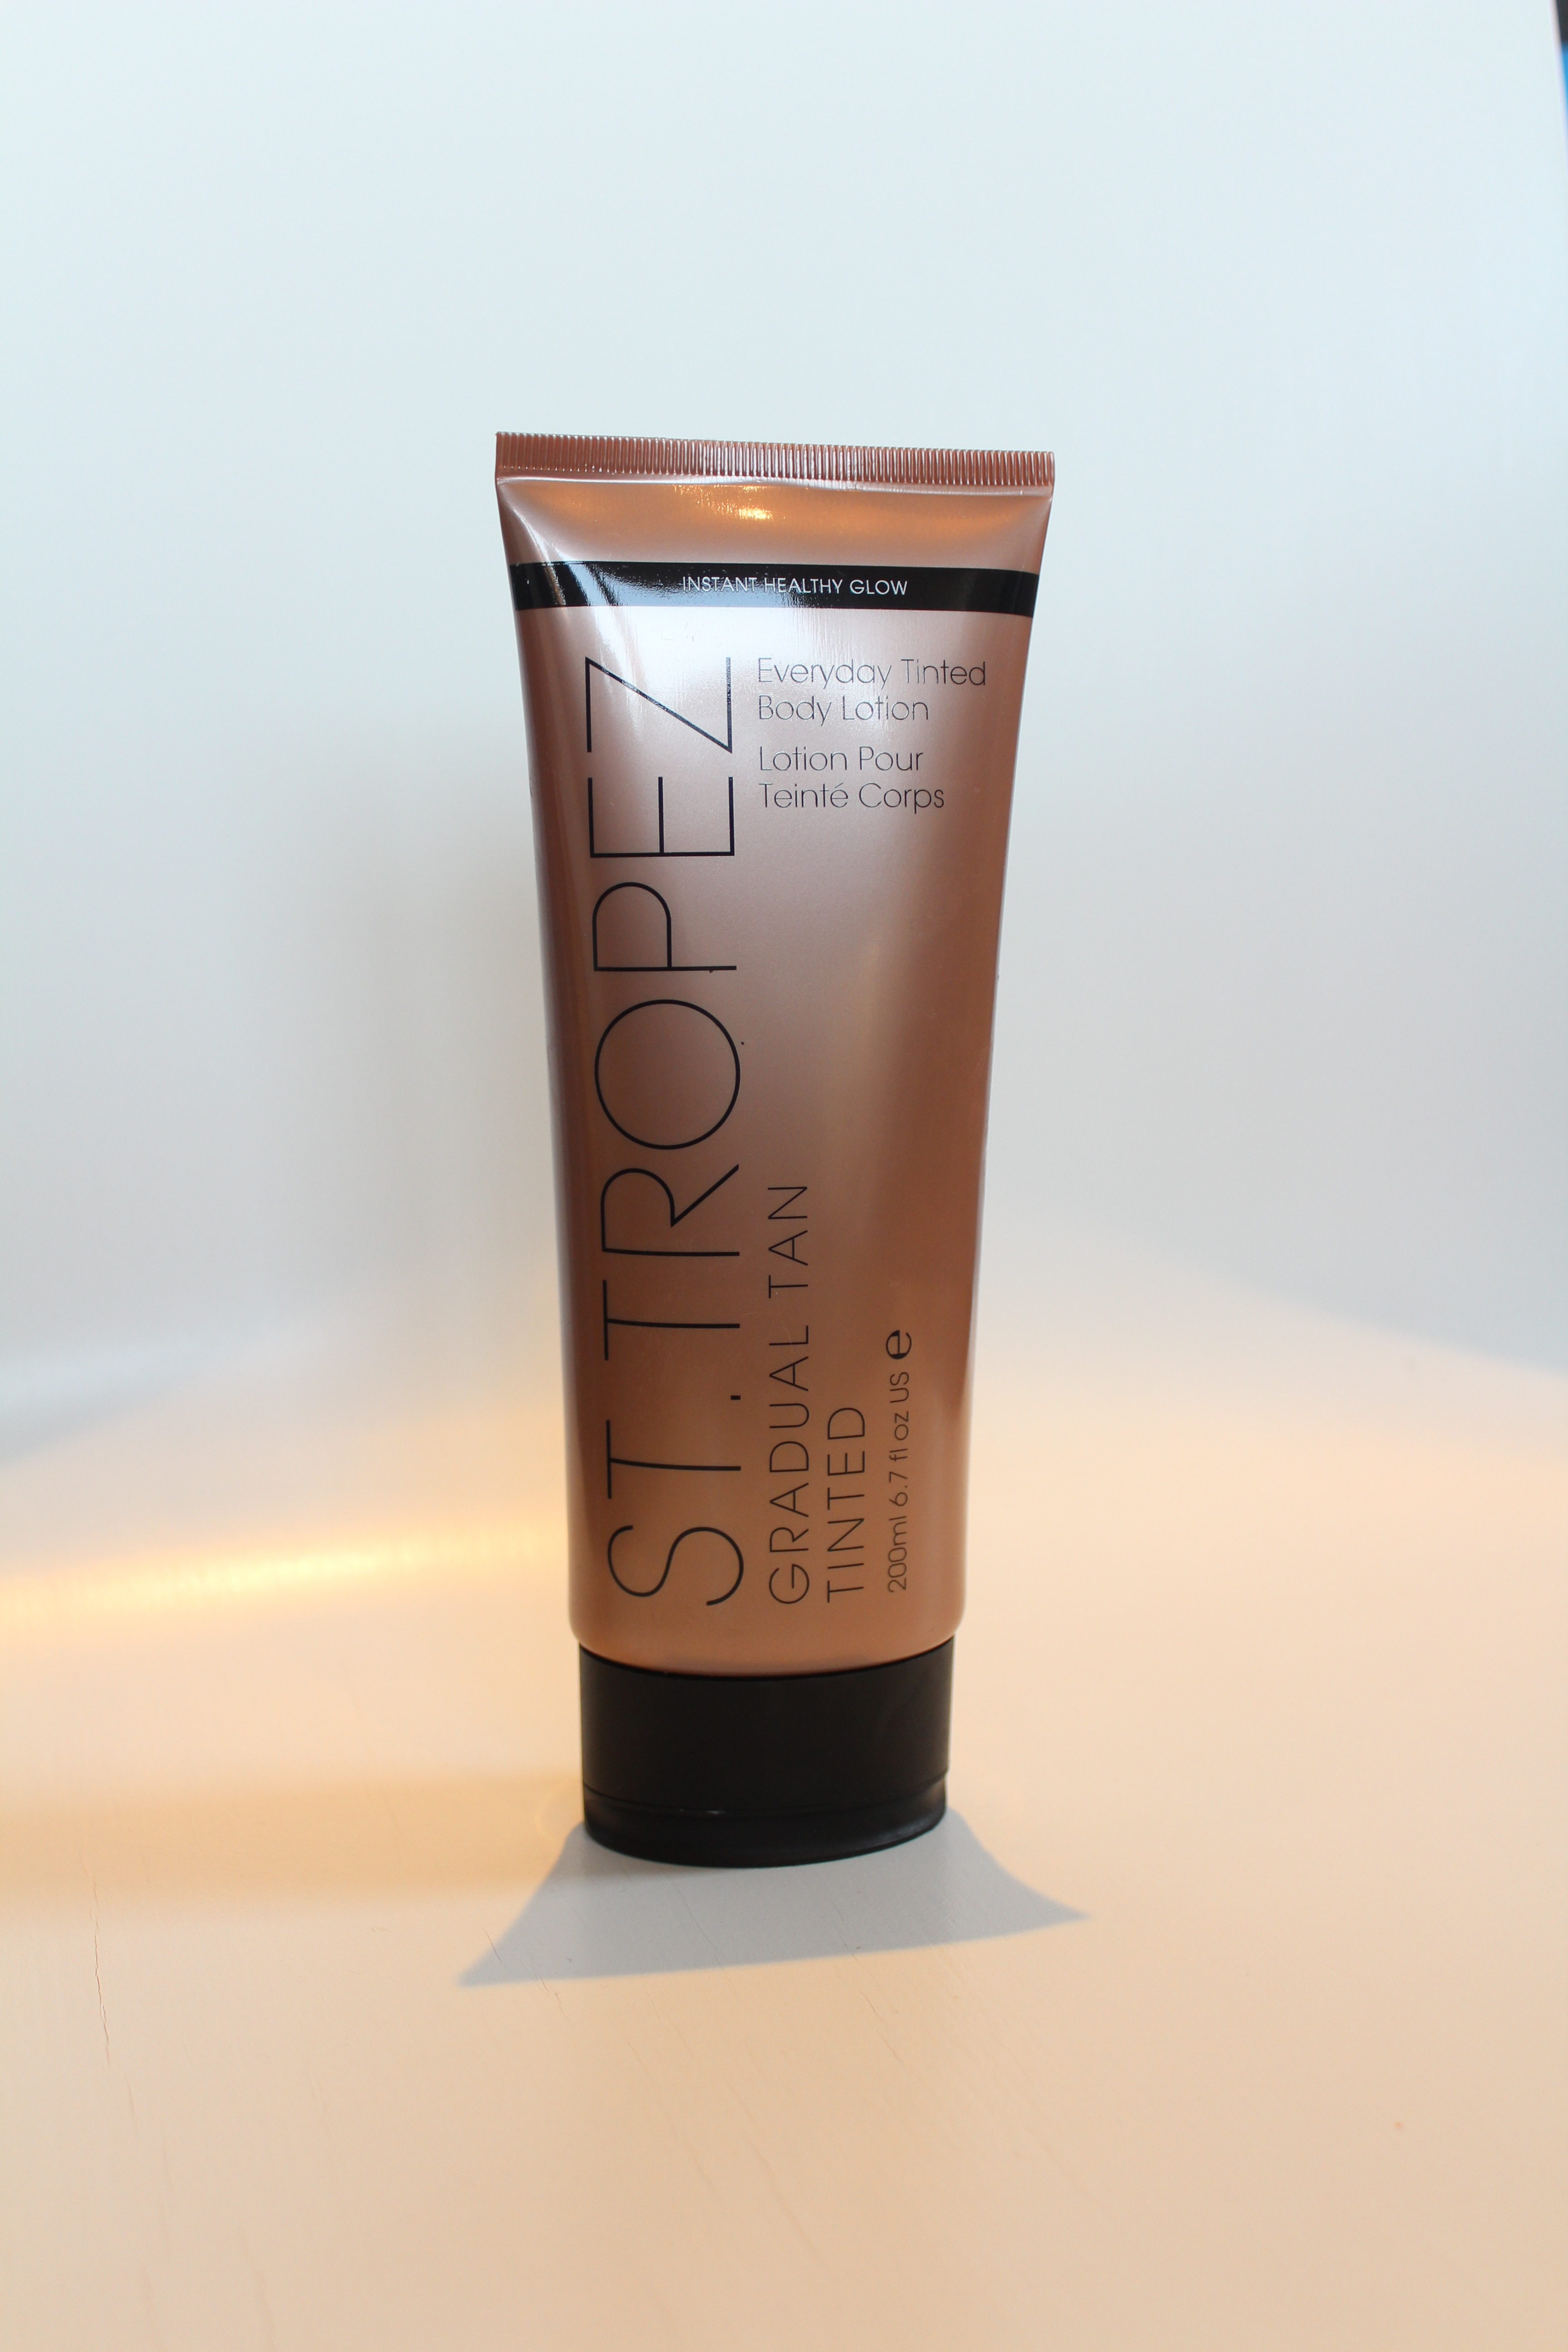 landdistrikterne hjemme Bevidstløs St Tropez Gradual Tan Tinted Everyday Body Lotion Review - Face Made Up -  Beauty Product Reviews, Makeup Tutorial Videos & Lifestyle